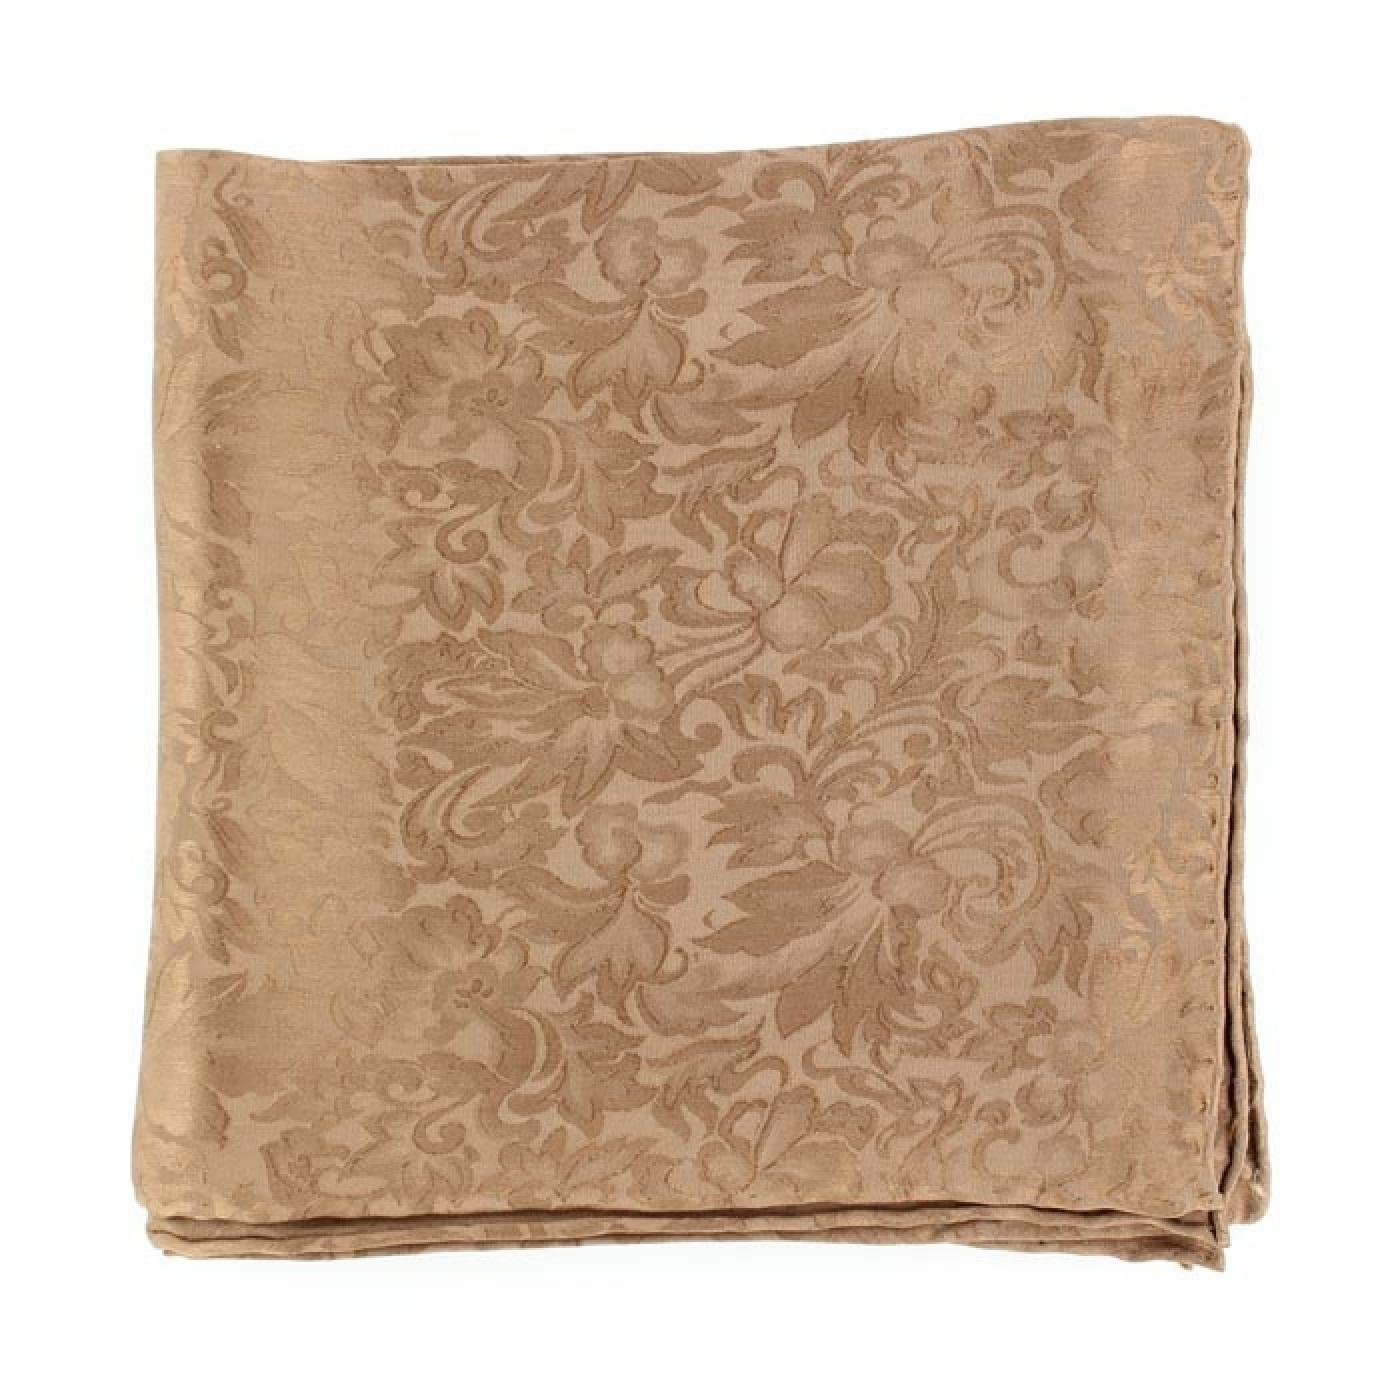 M&F Western Products Jacquard Wild Rags Brown